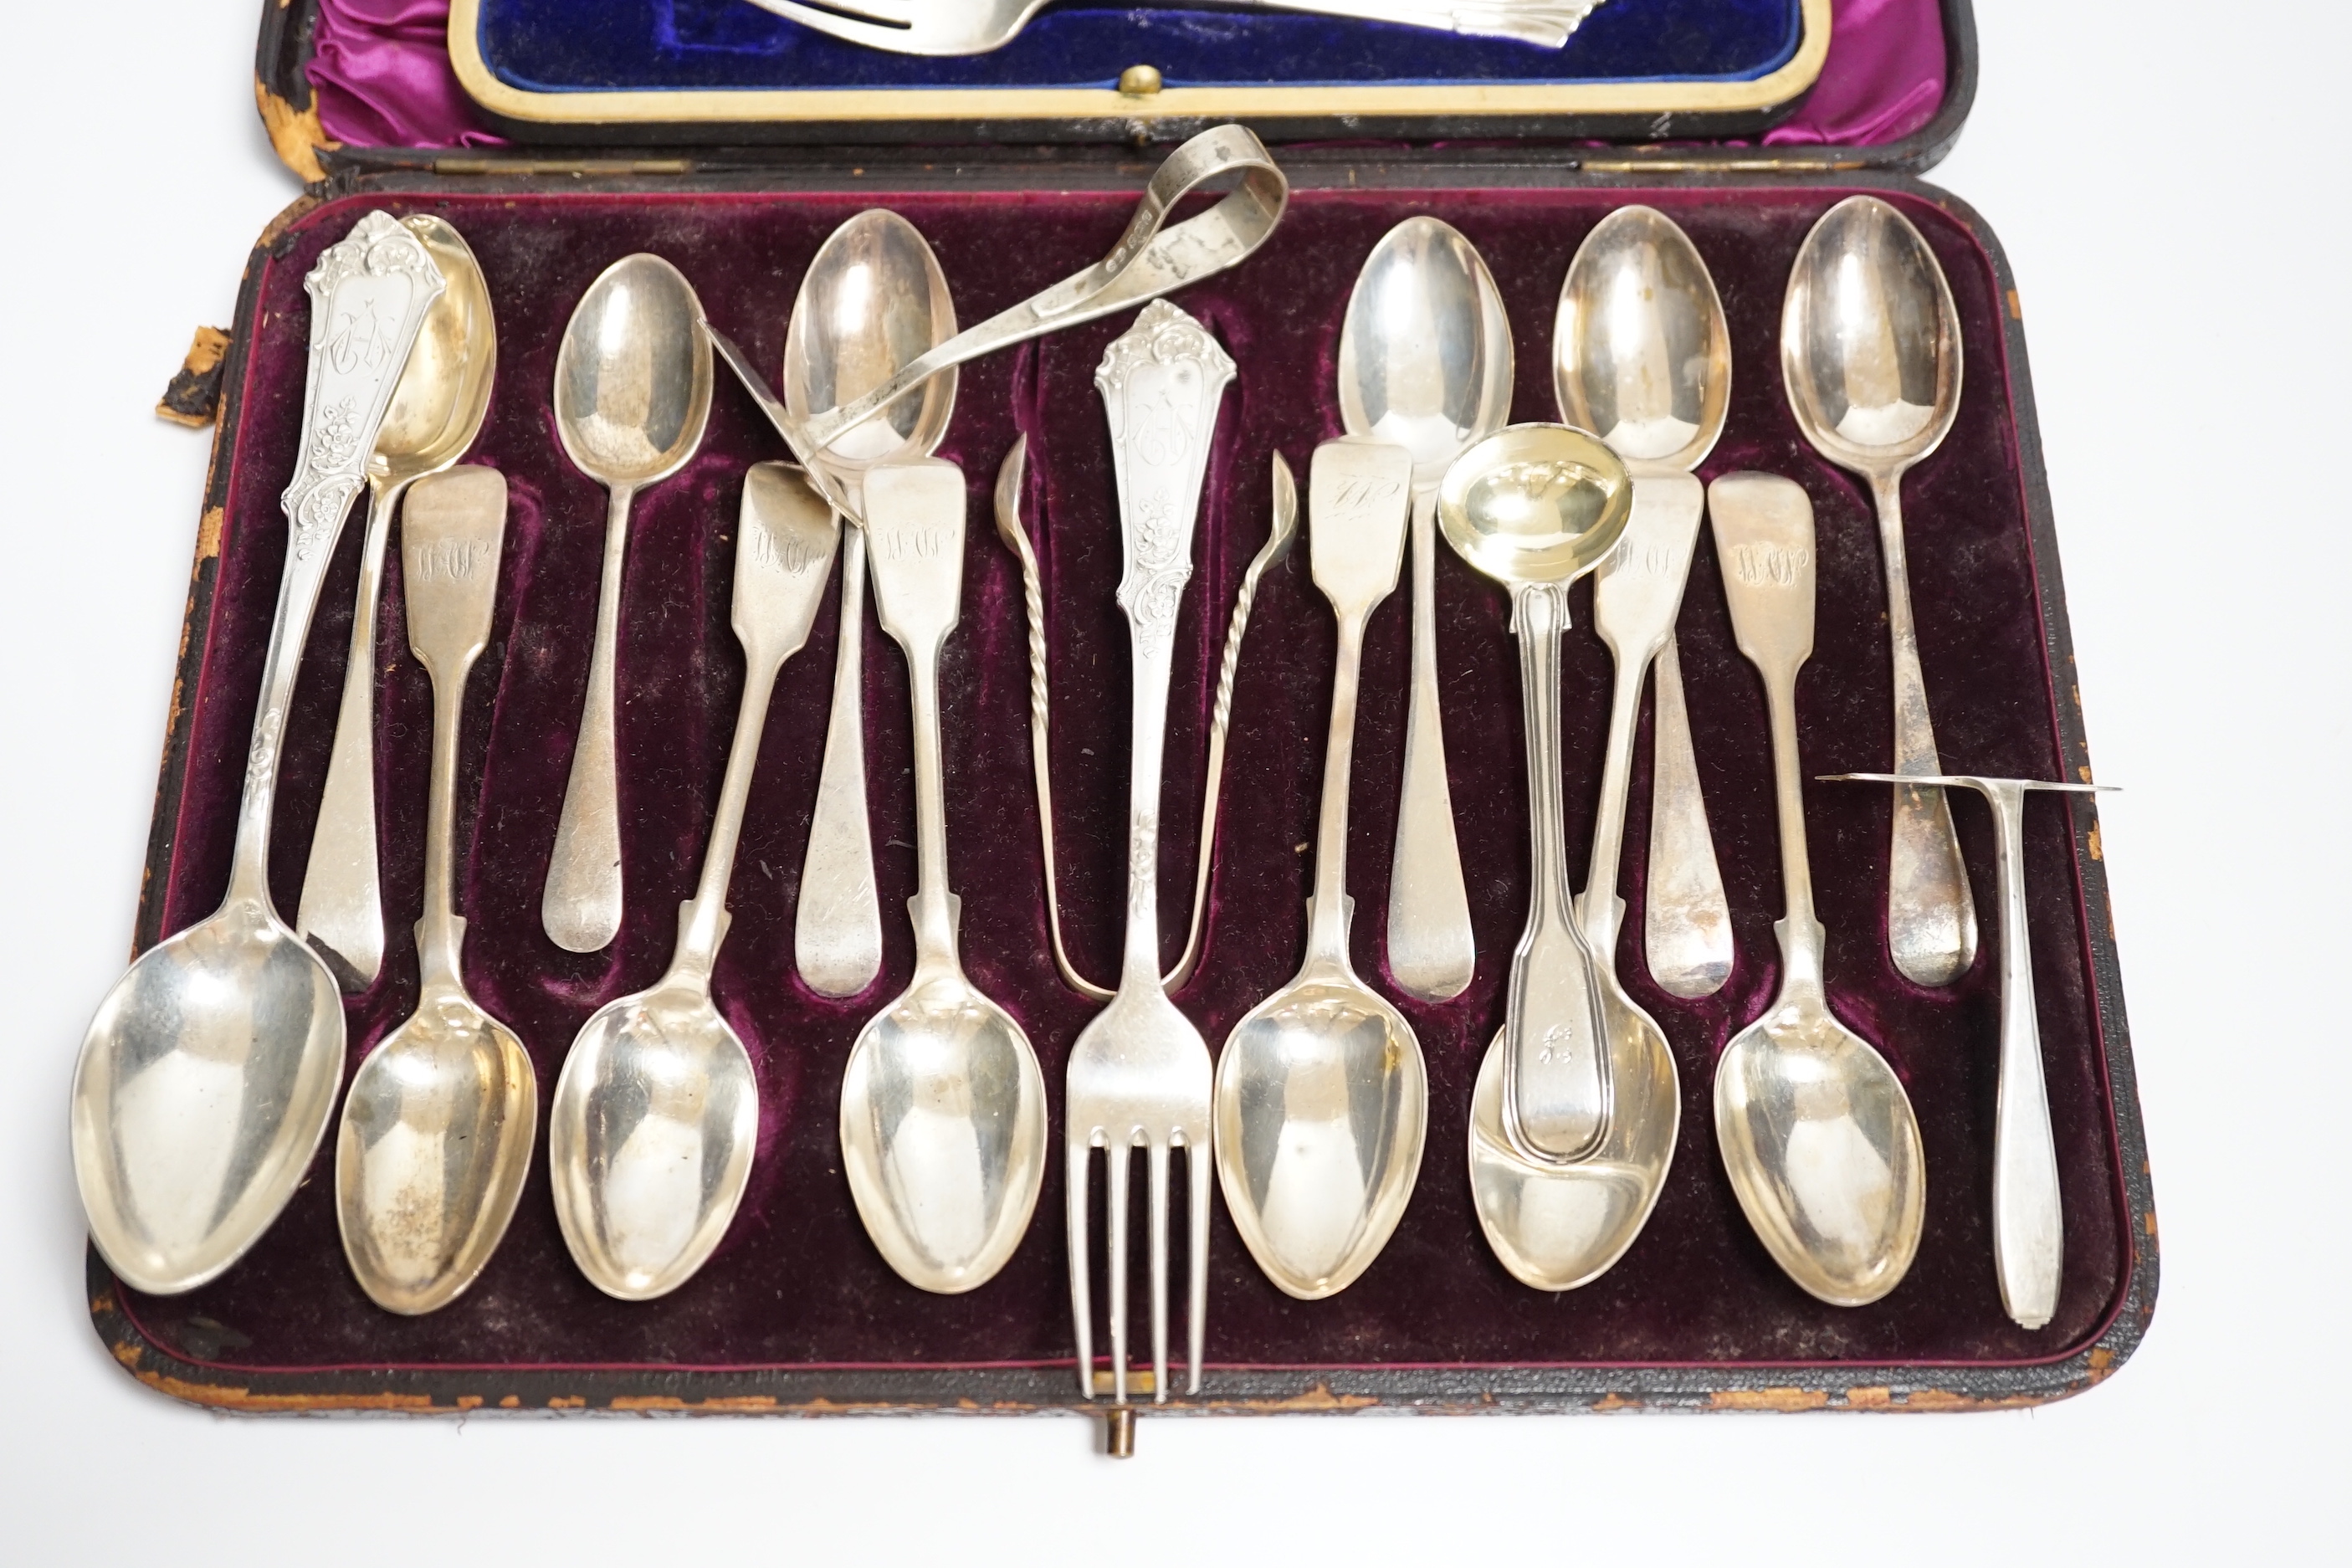 Two sets of six silver teaspoons, fiddle and Old English pattern and other silver or 900 flatware including a cased Christening trio (a.f.).